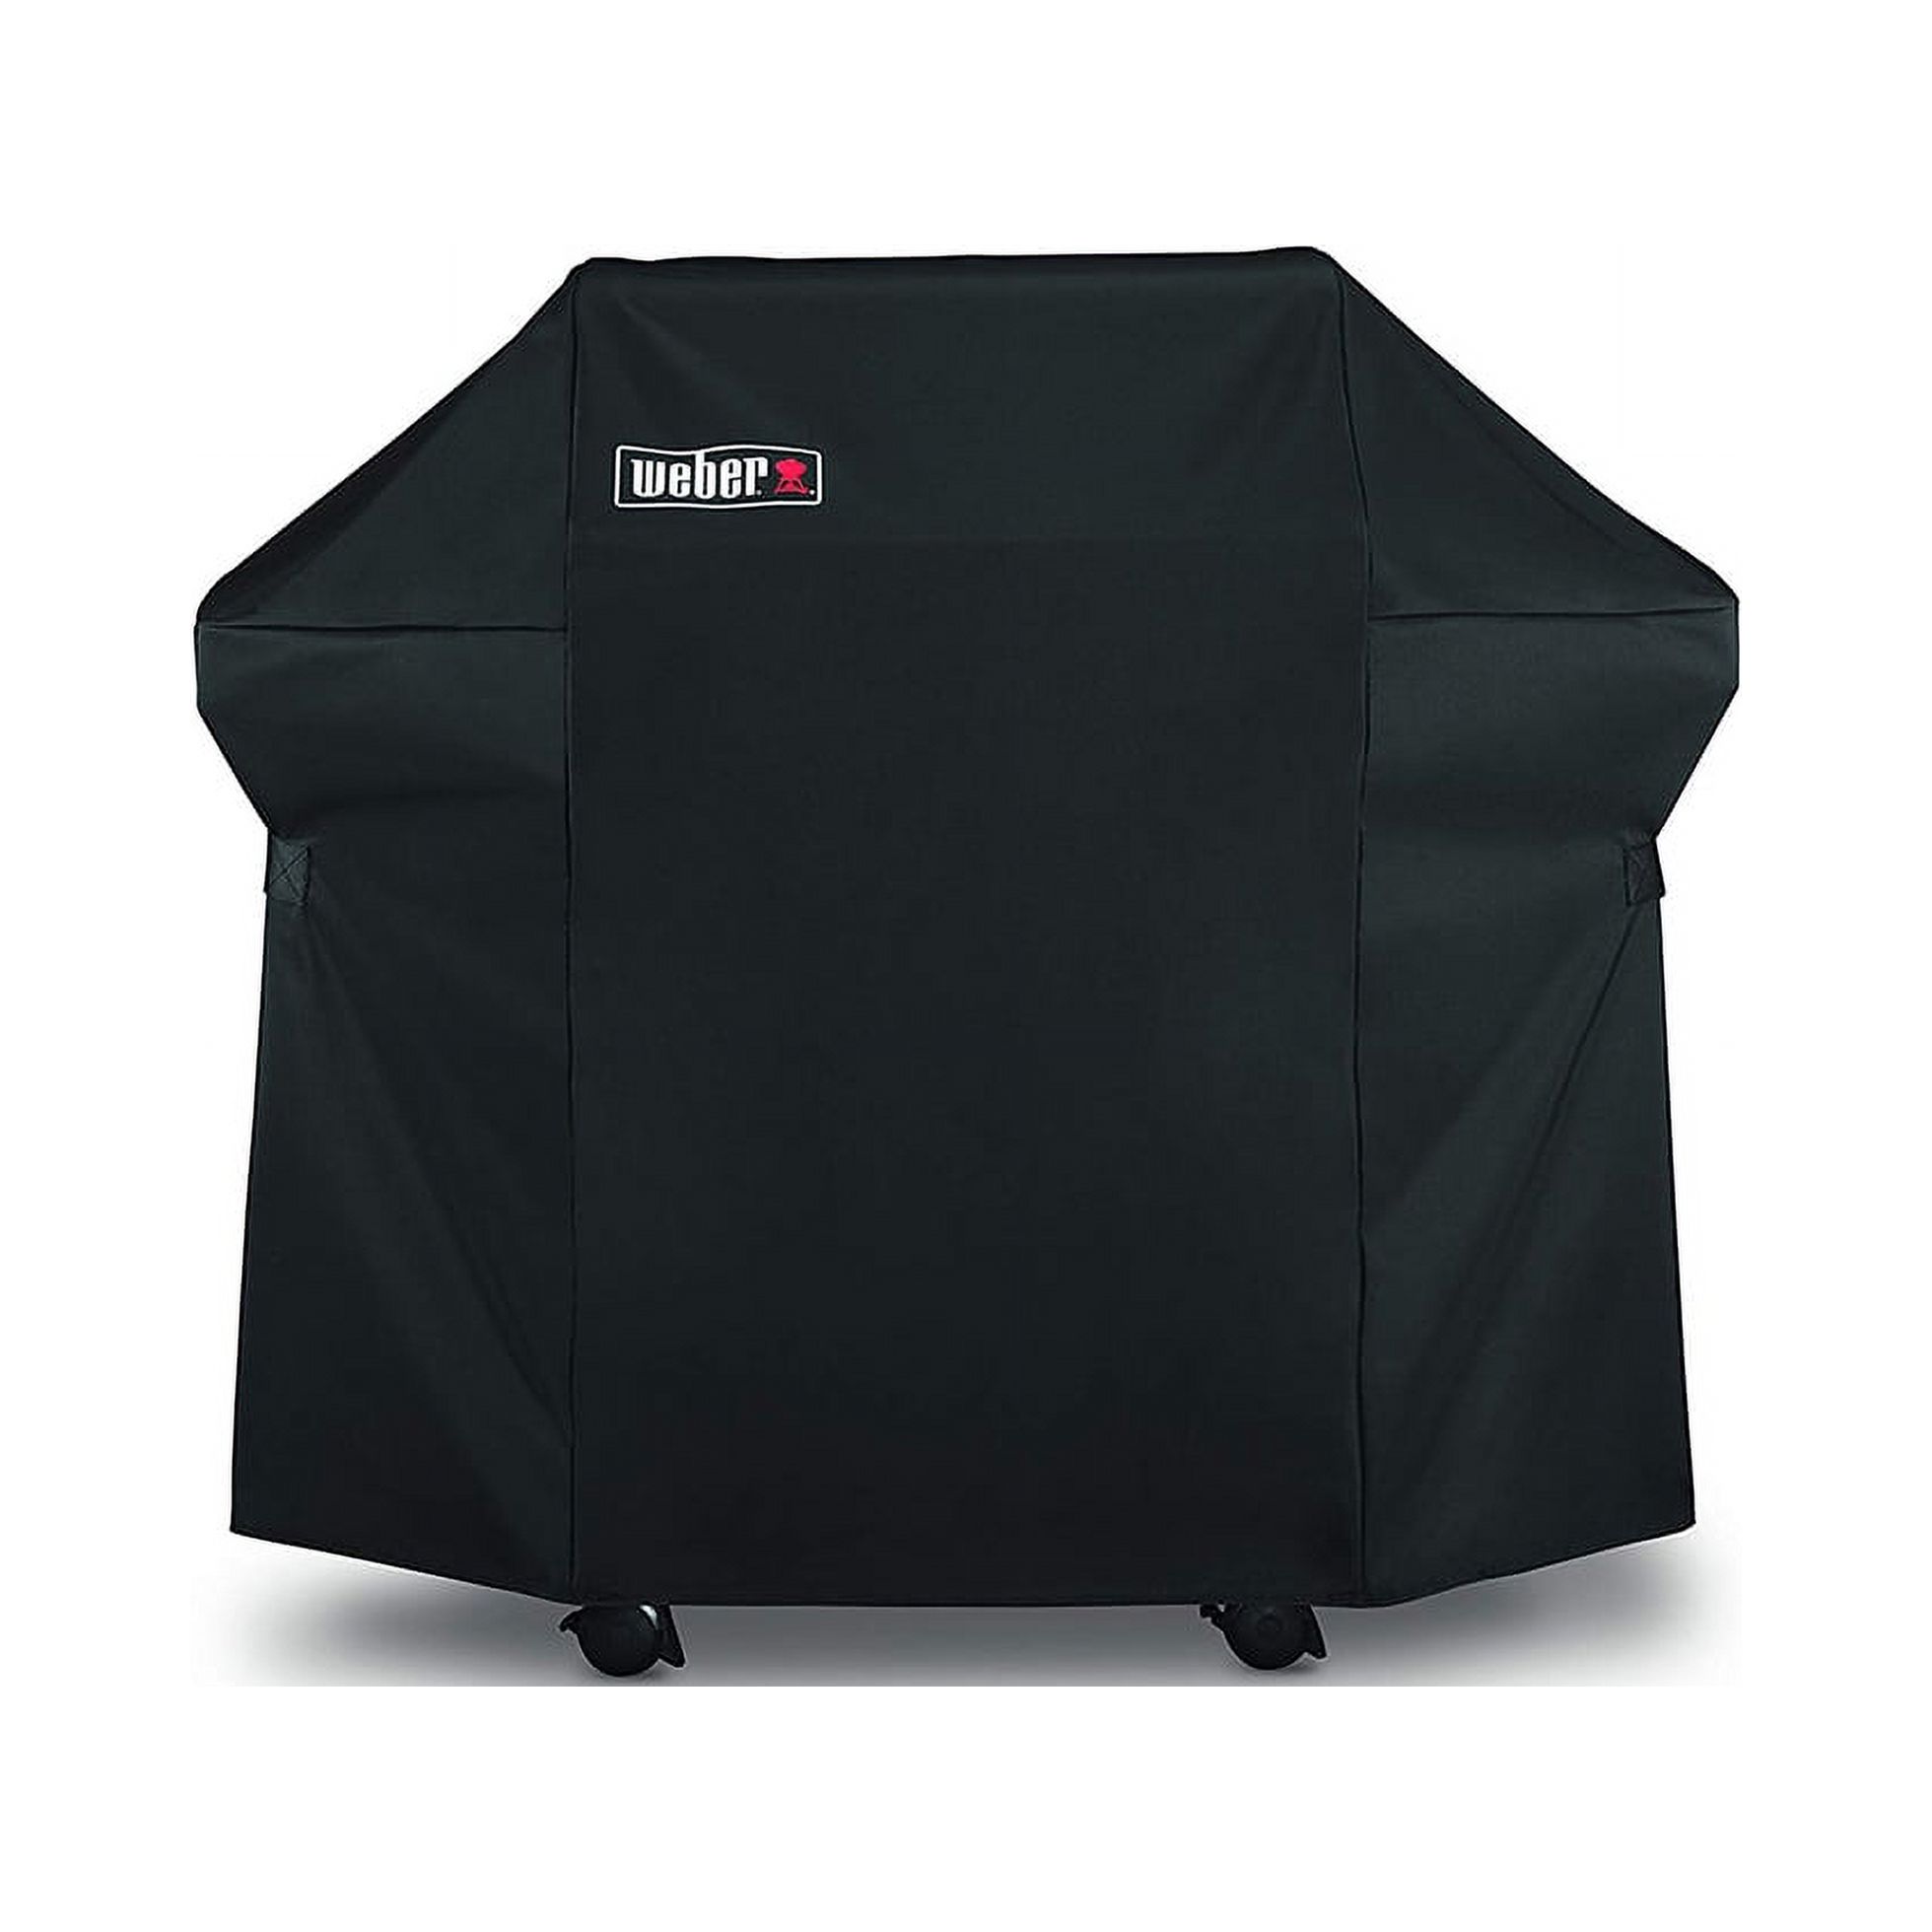 Weber 7106 Grill Cover for Weber Spirit 220 and 300 Series Gas Grills (52 x 26 x 43 inches)Black - image 1 of 7